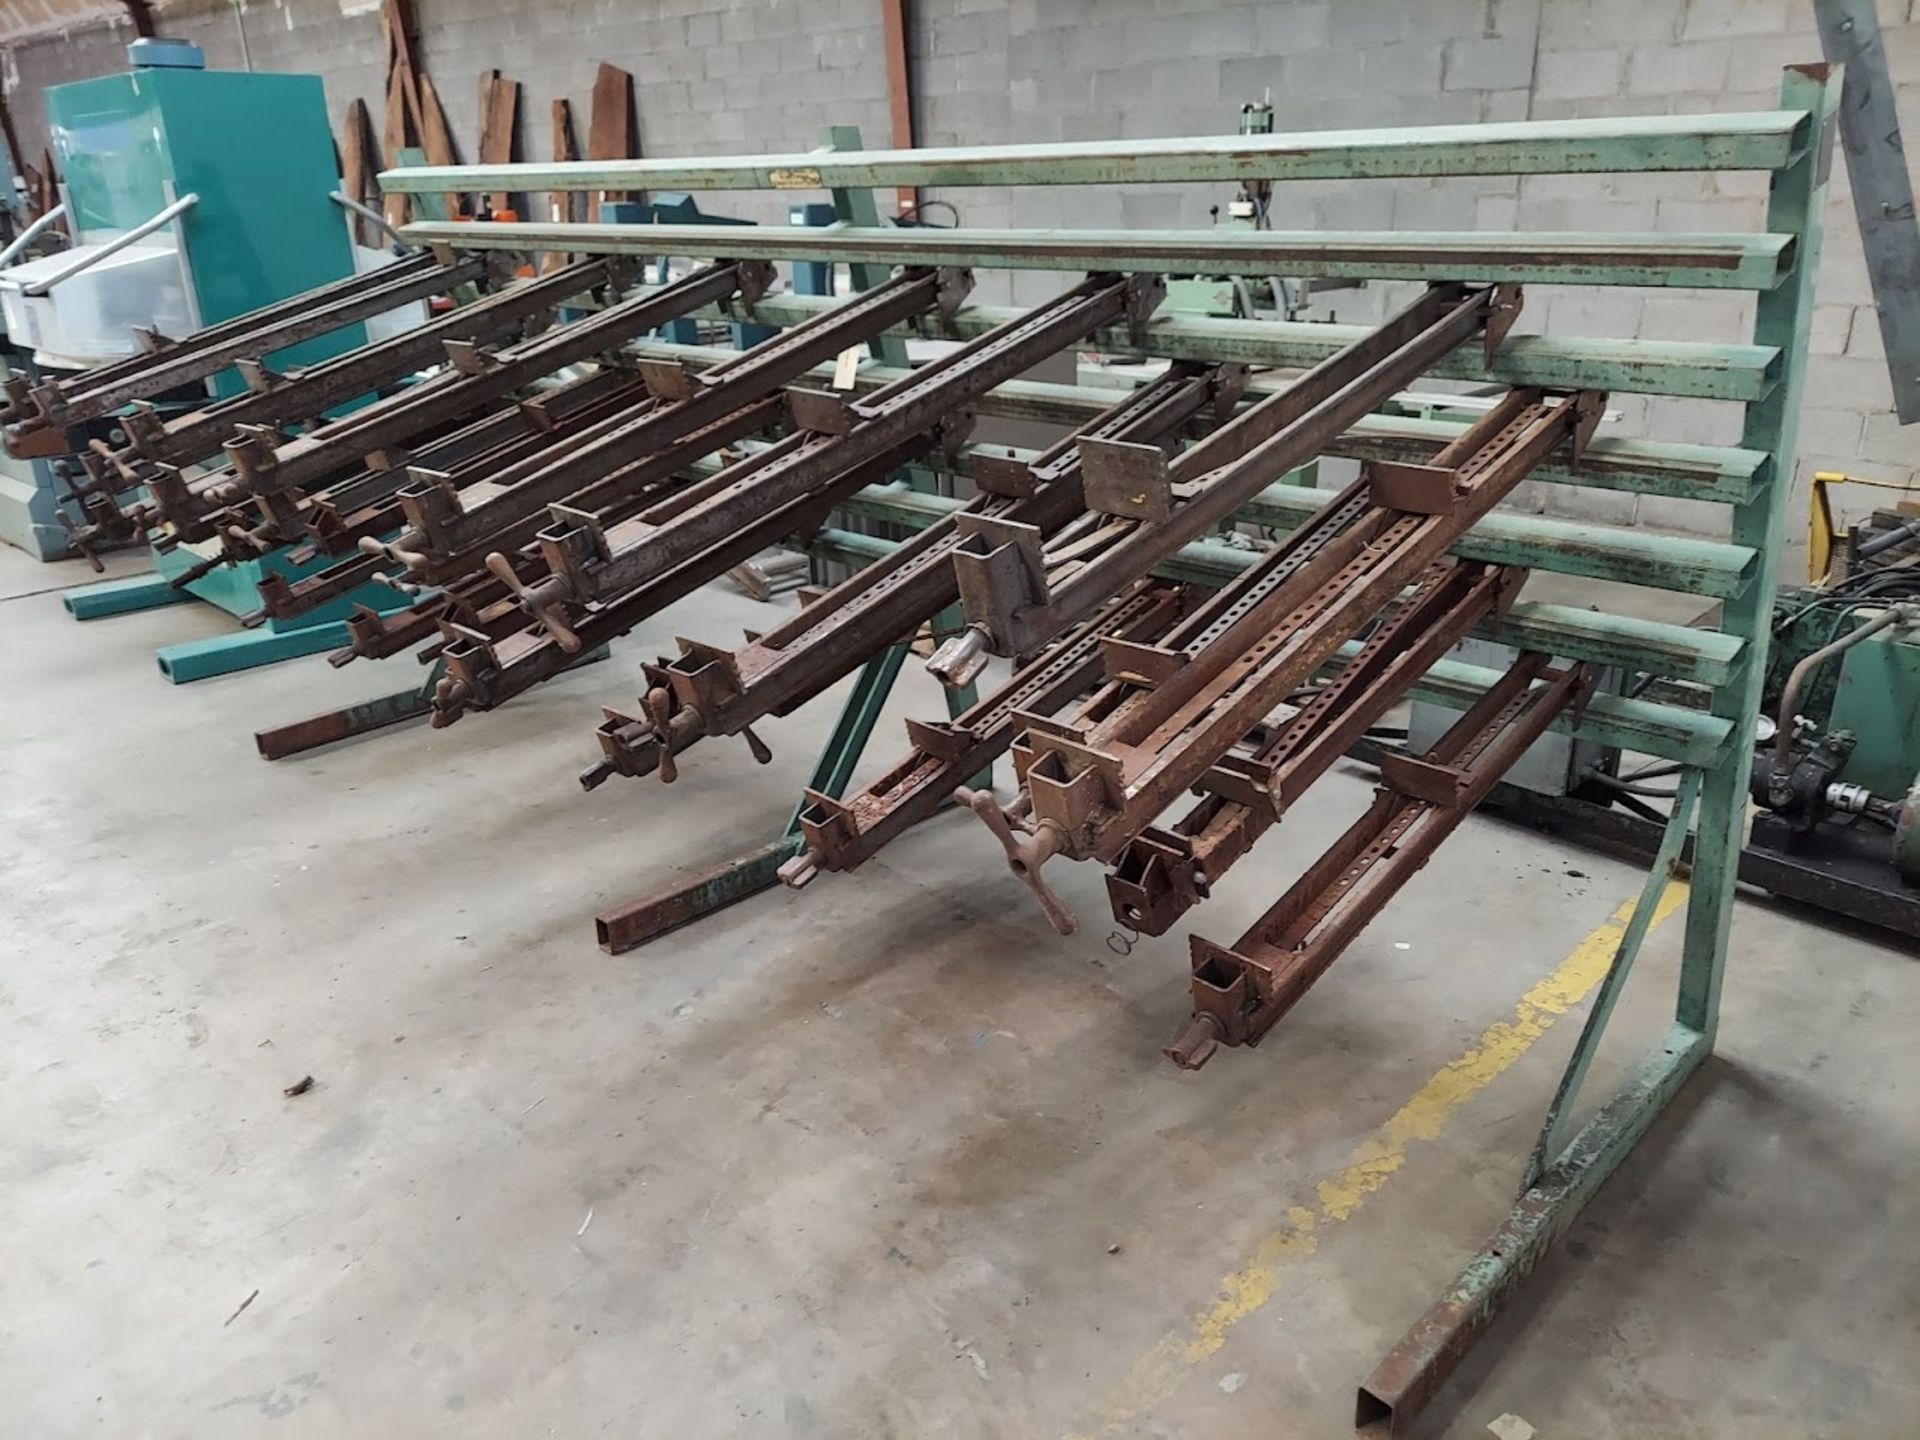 James L. Taylor 12' Panel Clamp, Model #79A, Comes with 29 Clamps, 16 - 32" Clamps & 13" 40" Clamps - Image 2 of 4